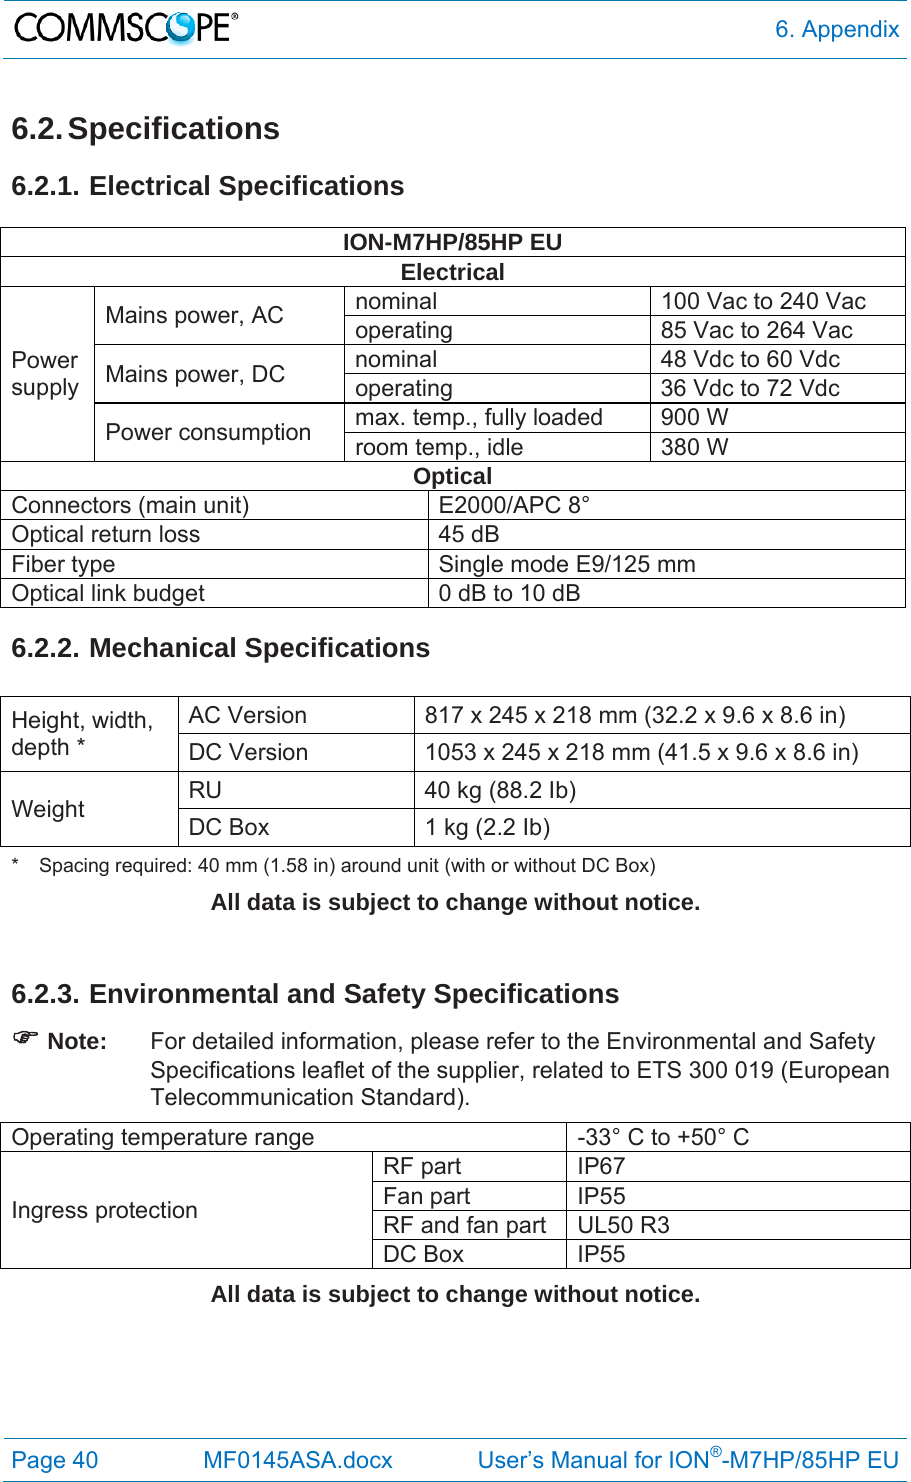  6. Appendix Page 40  MF0145ASA.docx             User’s Manual for ION®-M7HP/85HP EU 6.2. Specifications 6.2.1. Electrical Specifications  ION-M7HP/85HP EU Electrical Power supply Mains power, AC  nominal  100 Vac to 240 Vac operating  85 Vac to 264 Vac Mains power, DC  nominal  48 Vdc to 60 Vdc operating  36 Vdc to 72 Vdc Power consumption  max. temp., fully loaded  900 W room temp., idle  380 W Optical Connectors (main unit)  E2000/APC 8° Optical return loss  45 dB Fiber type  Single mode E9/125 mm  Optical link budget  0 dB to 10 dB 6.2.2. Mechanical Specifications  Height, width, depth * AC Version  817 x 245 x 218 mm (32.2 x 9.6 x 8.6 in) DC Version  1053 x 245 x 218 mm (41.5 x 9.6 x 8.6 in) Weight  RU  40 kg (88.2 Ib) DC Box  1 kg (2.2 Ib) *   Spacing required: 40 mm (1.58 in) around unit (with or without DC Box) All data is subject to change without notice.  6.2.3. Environmental and Safety Specifications   Note:  For detailed information, please refer to the Environmental and Safety Specifications leaflet of the supplier, related to ETS 300 019 (European Telecommunication Standard). Operating temperature range  -33° C to +50° C  Ingress protection RF part  IP67 Fan part  IP55 RF and fan part  UL50 R3 DC Box  IP55 All data is subject to change without notice.  